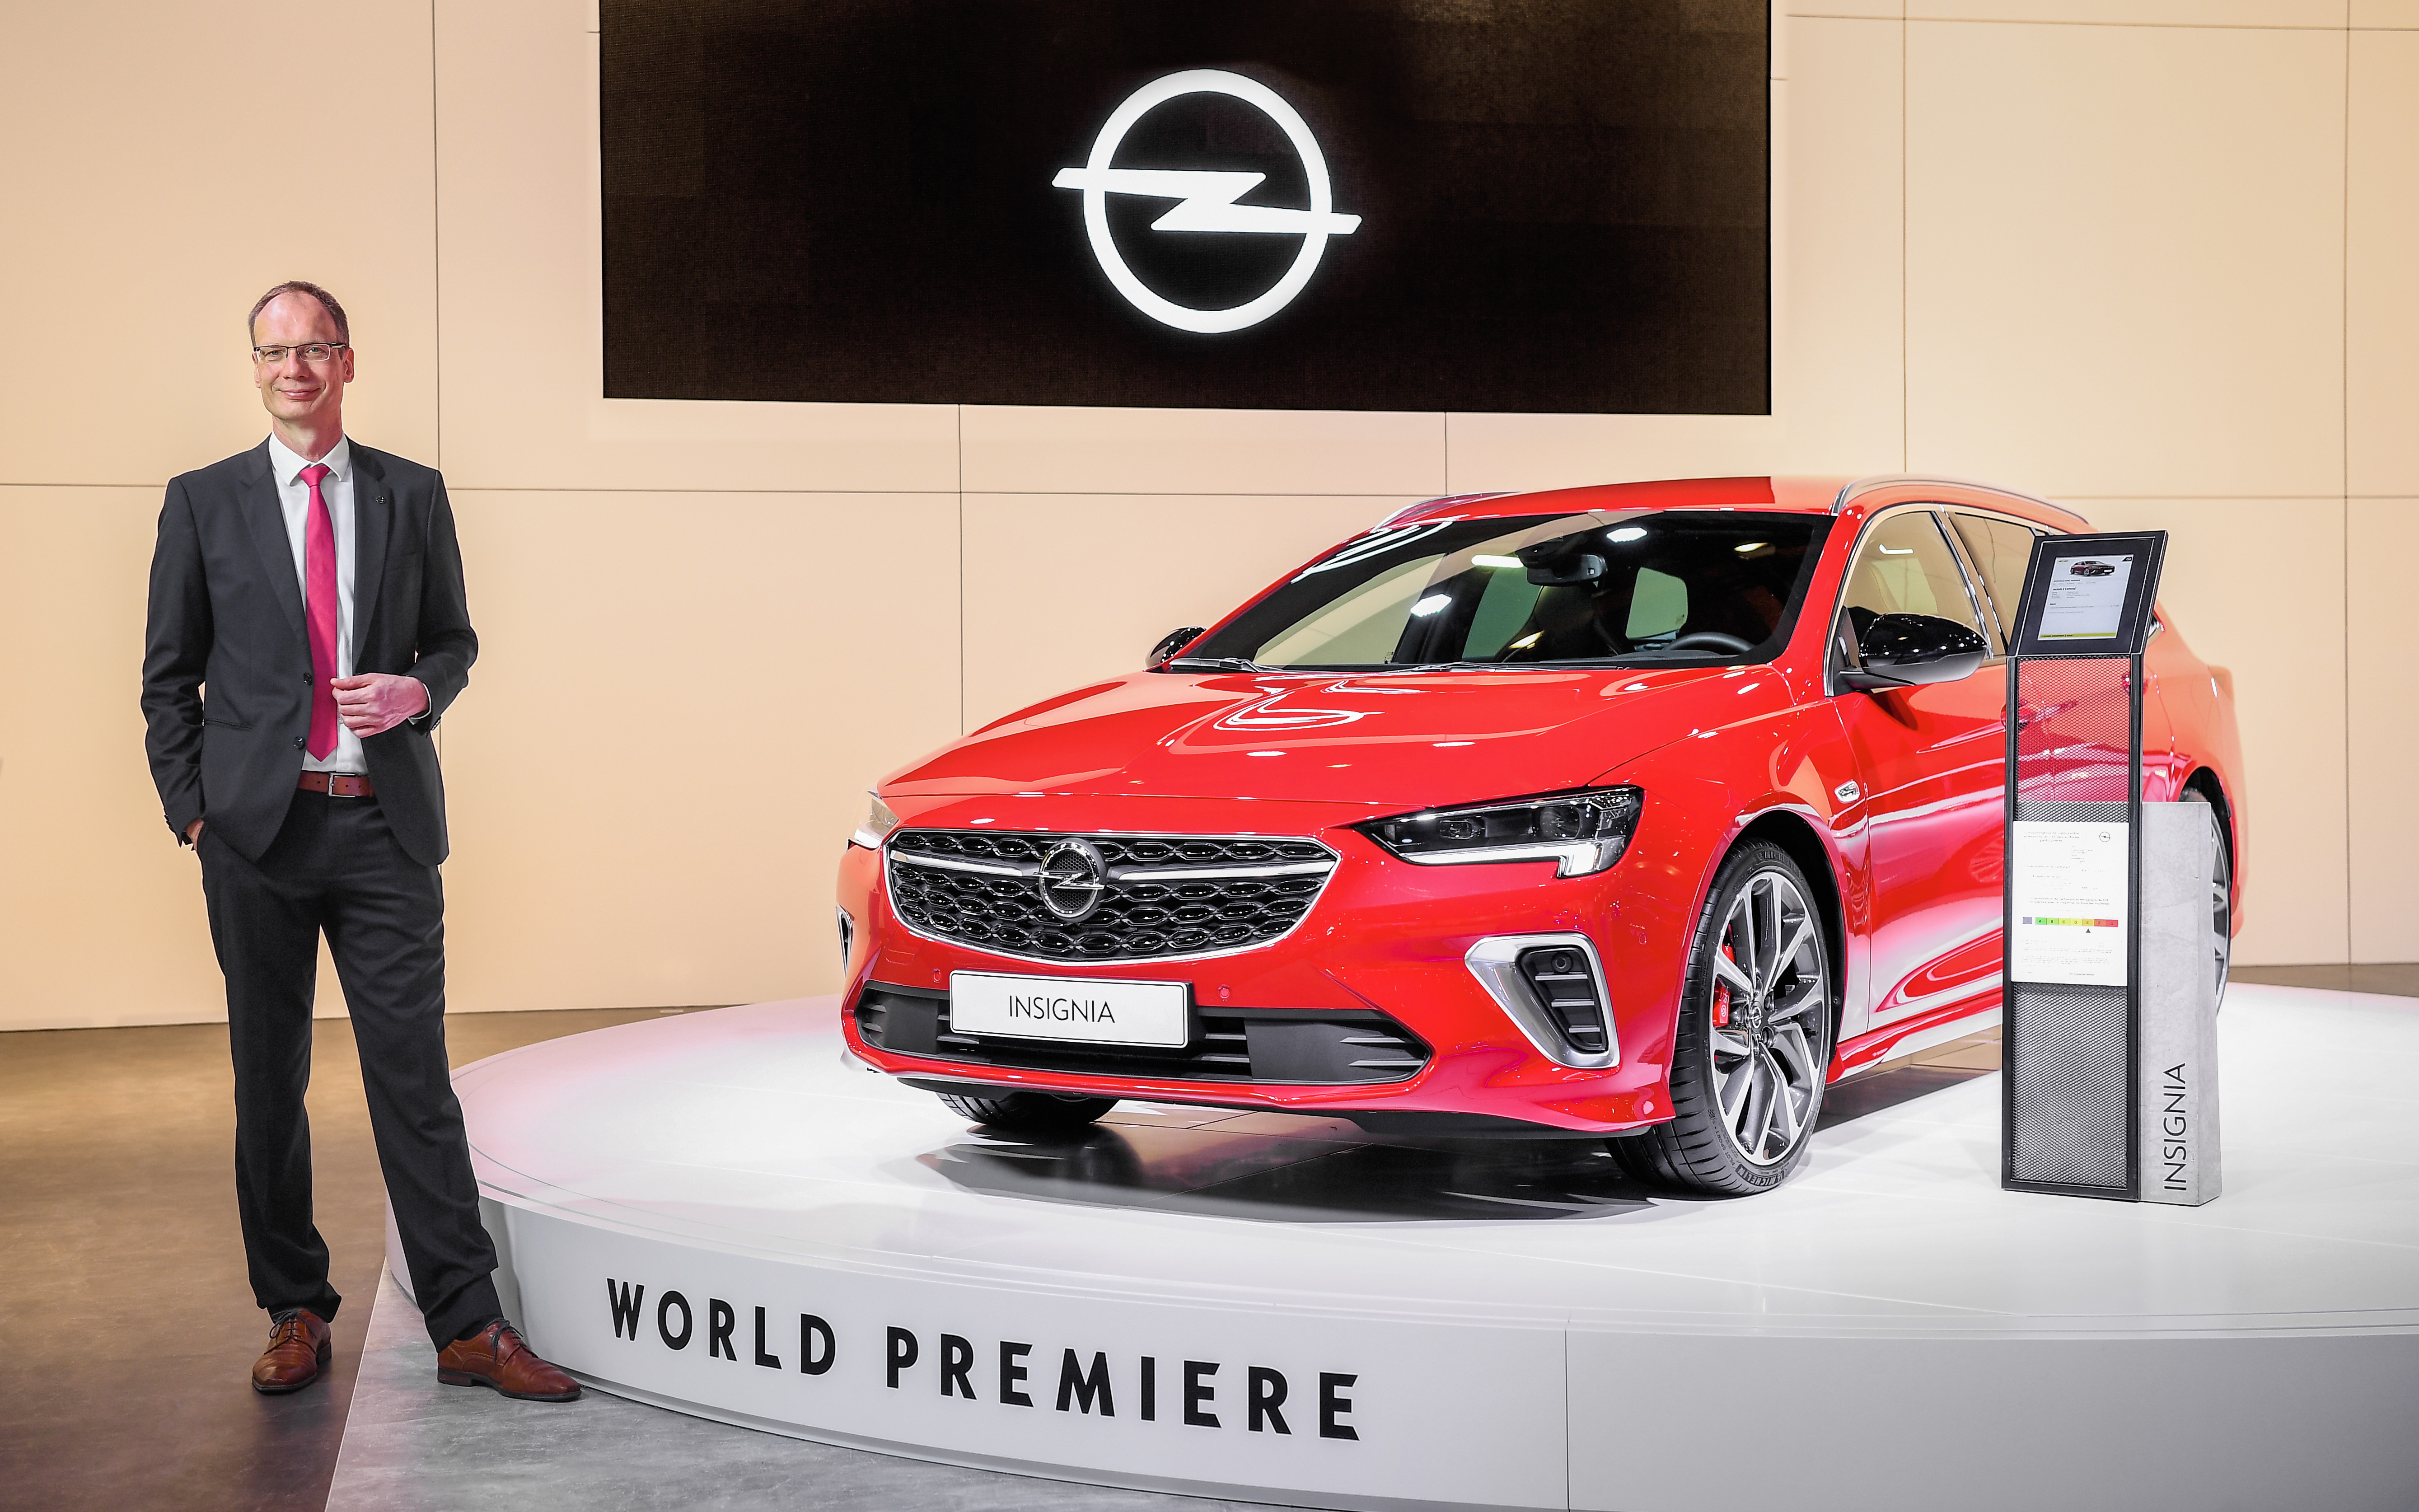 Ceo Lohscheller Opens Opel Stand At Brussels Motor Show Opel Automobile Gmbh Pressemitteilung Lifepr